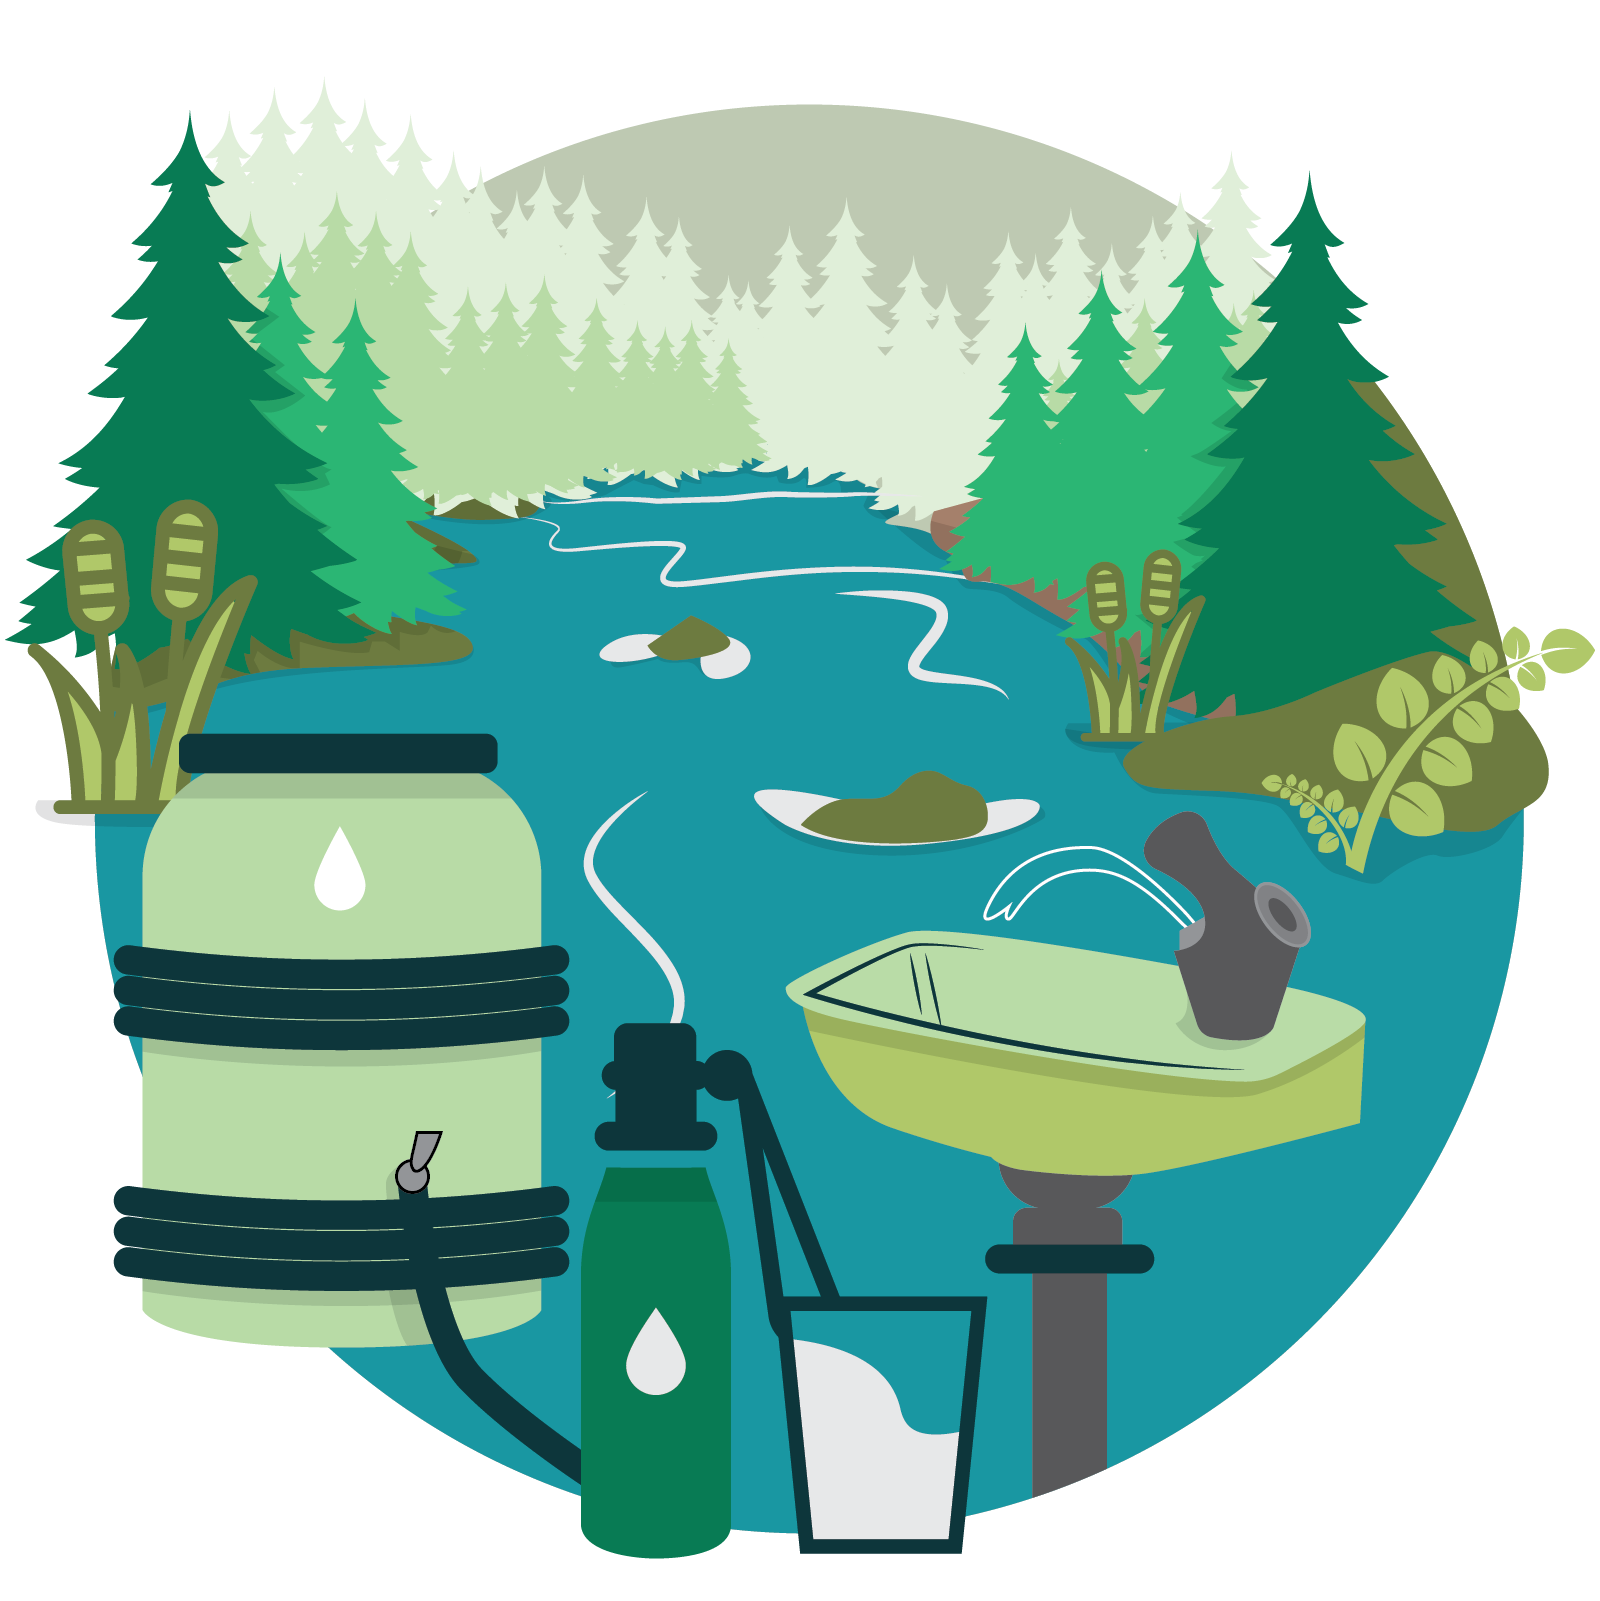 Illustration of a watershed with trees and a river in the background, with a water barrel, a water fountain, and a reusable water bottle in the foreground.